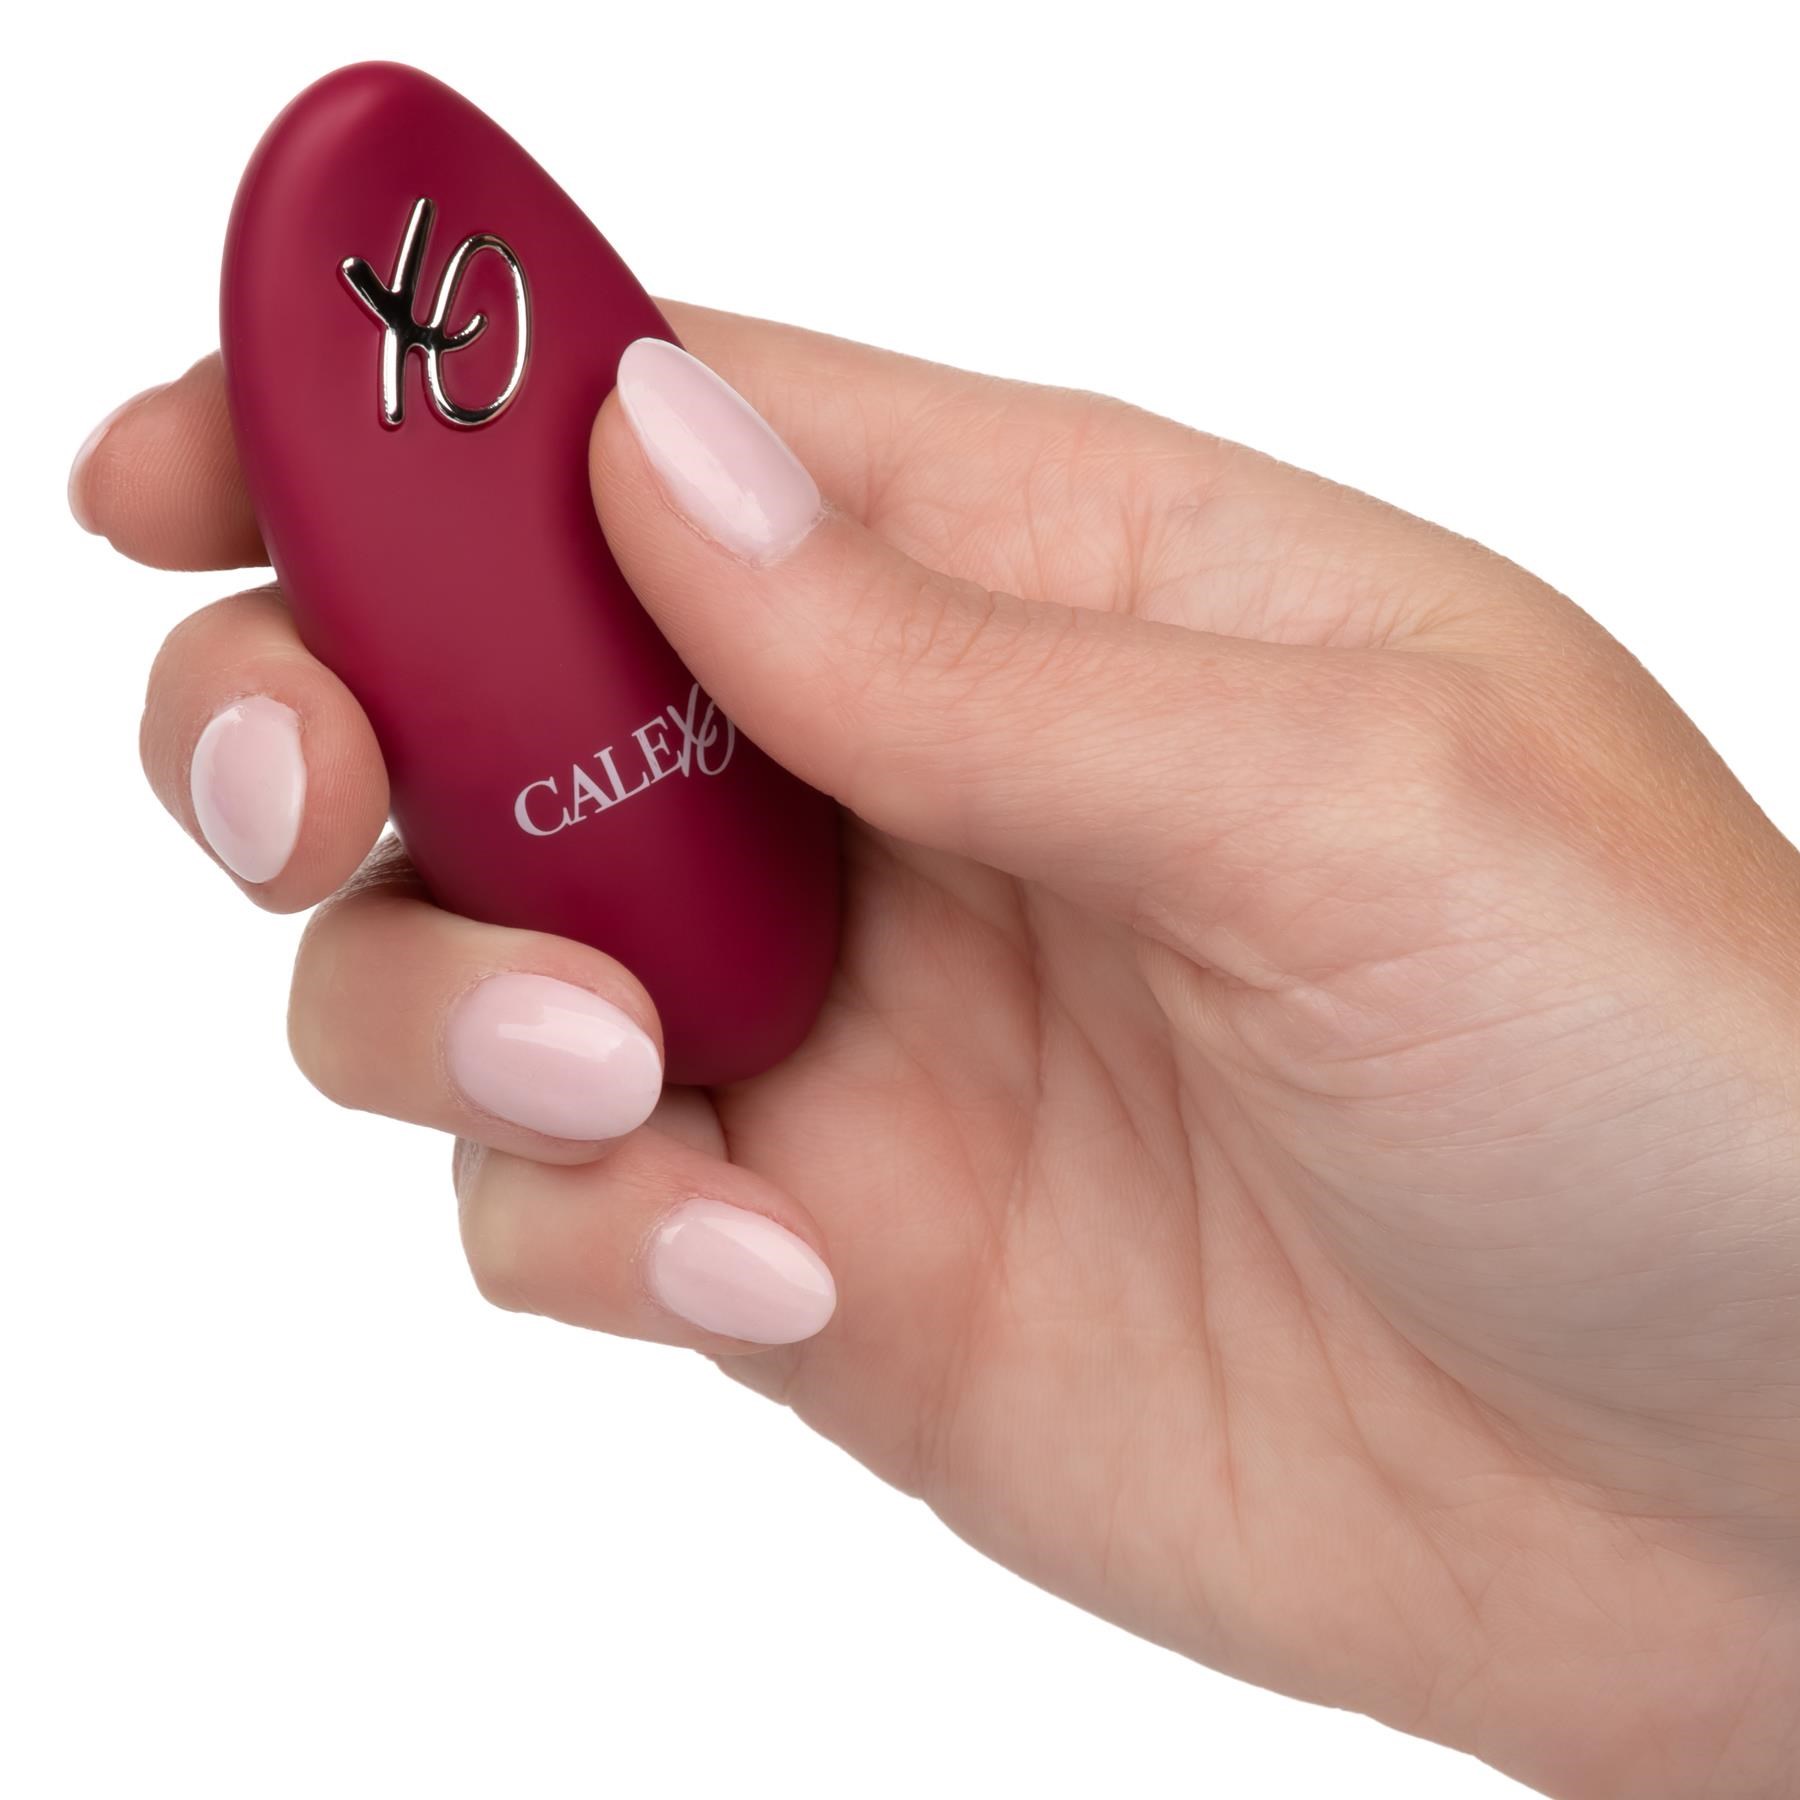 Dual Rider Thrust And Grind Vibrator - Hand Shot - Remote